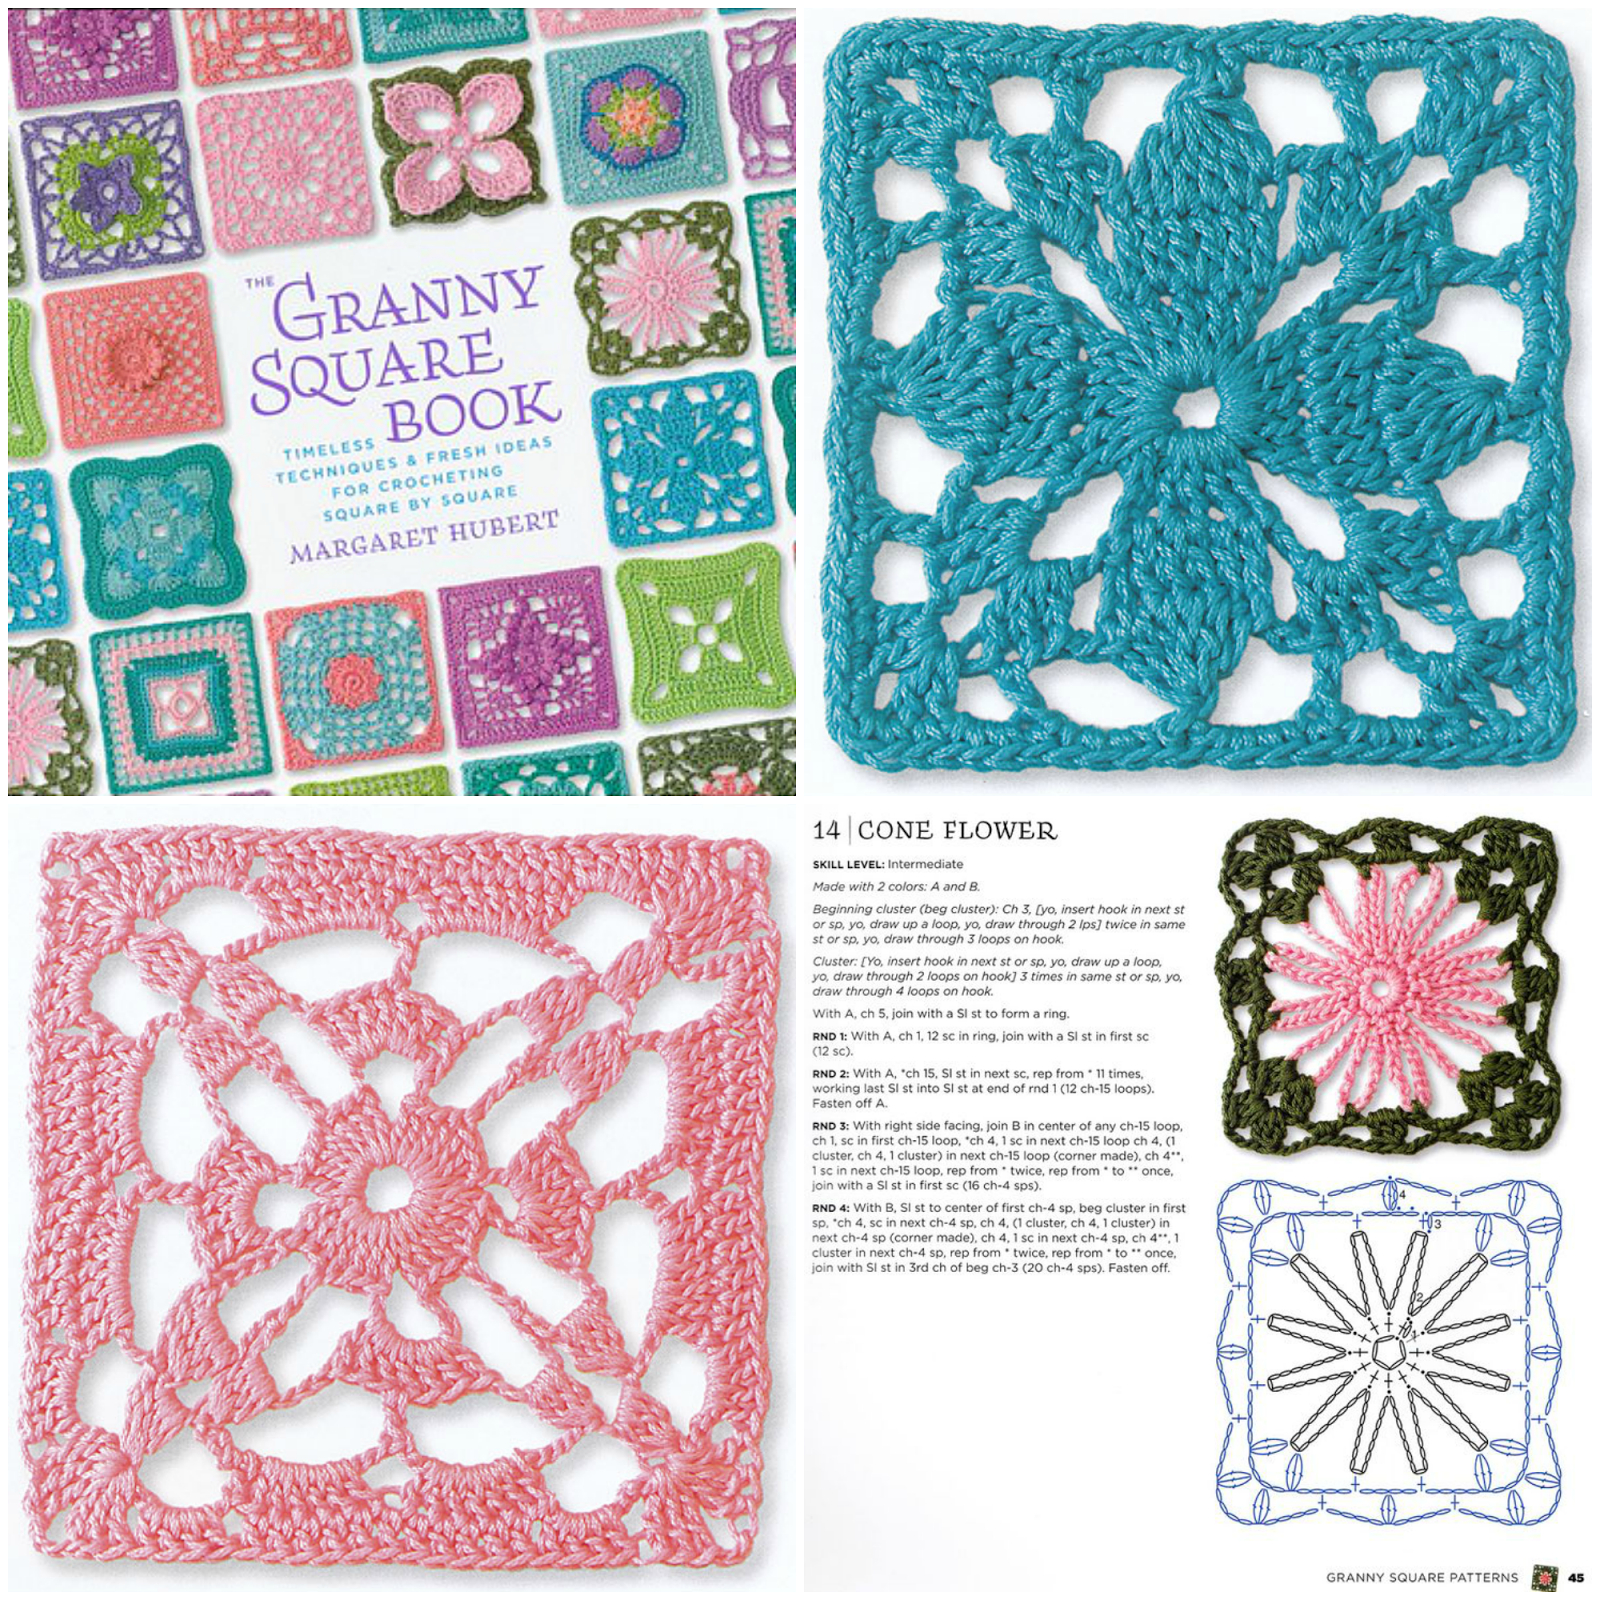 Crochet Squares Patterns My Rose Valley Lacy Crochet Squares